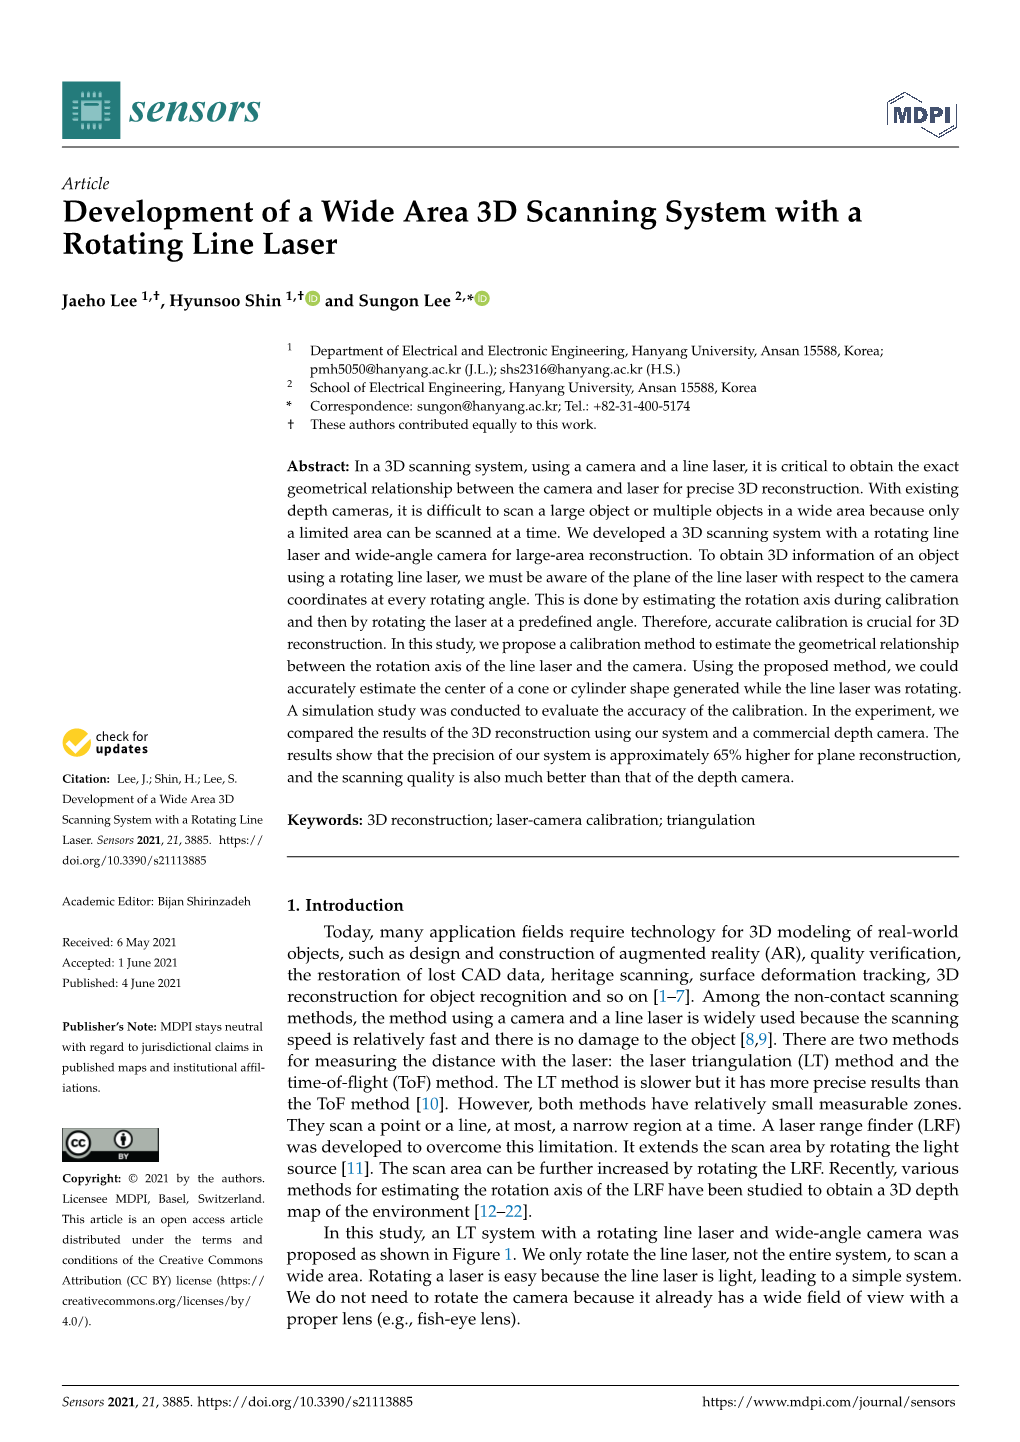 Development of a Wide Area 3D Scanning System with a Rotating Line Laser